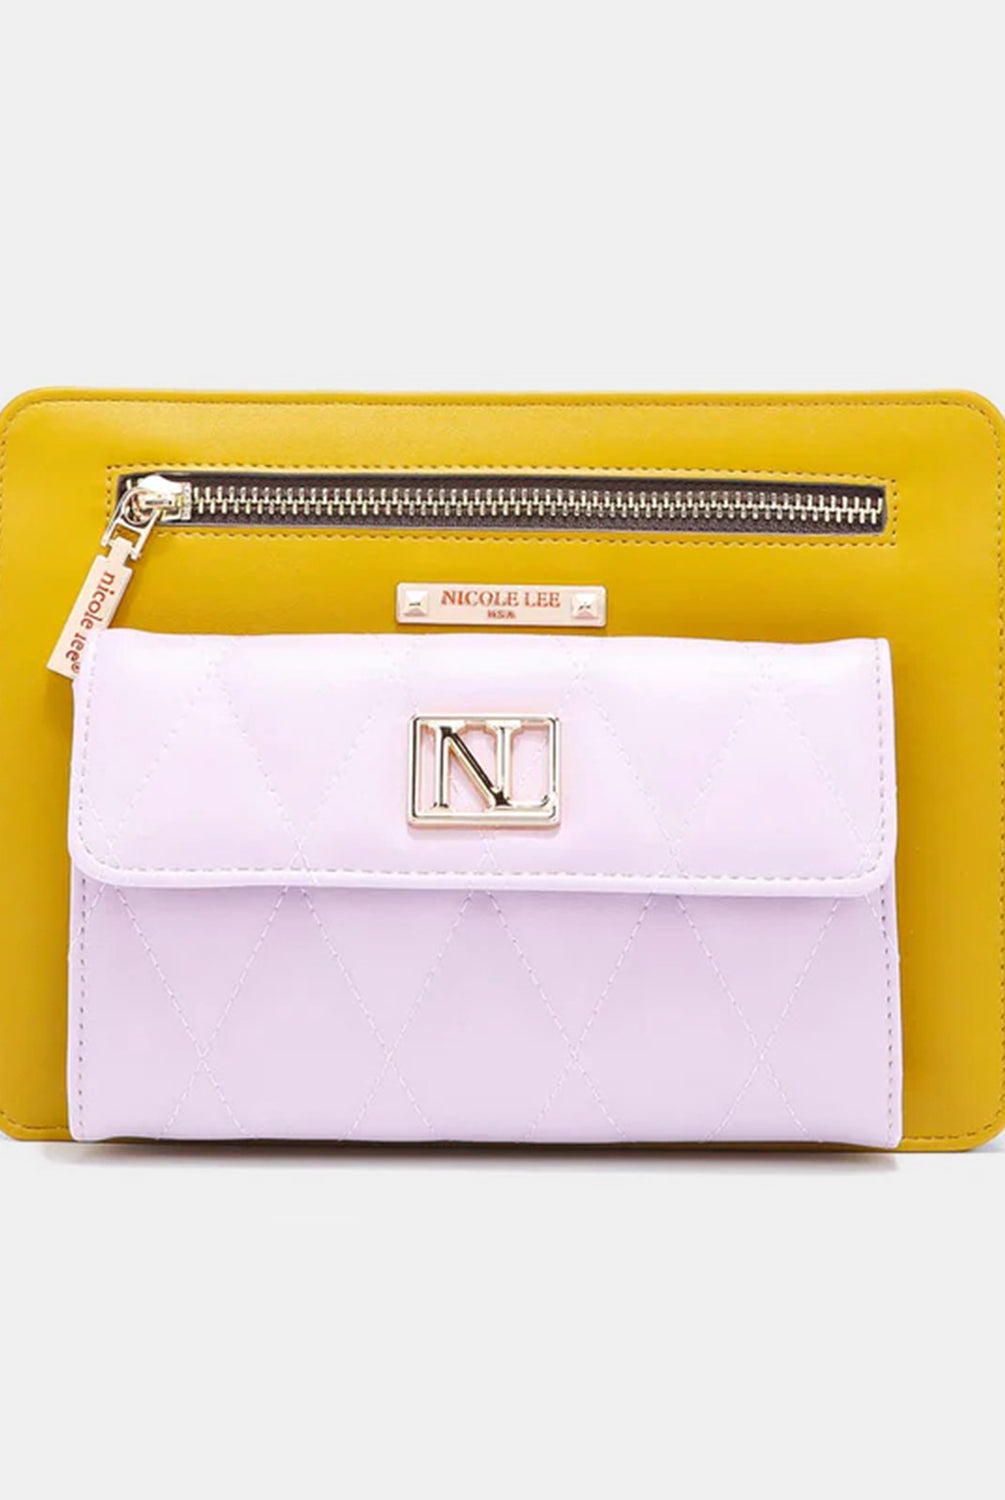 The green crossbody bag showcases a chic, quilted design with white accents, while the yellow version offers a bold, color-blocked look with pastel pink details.